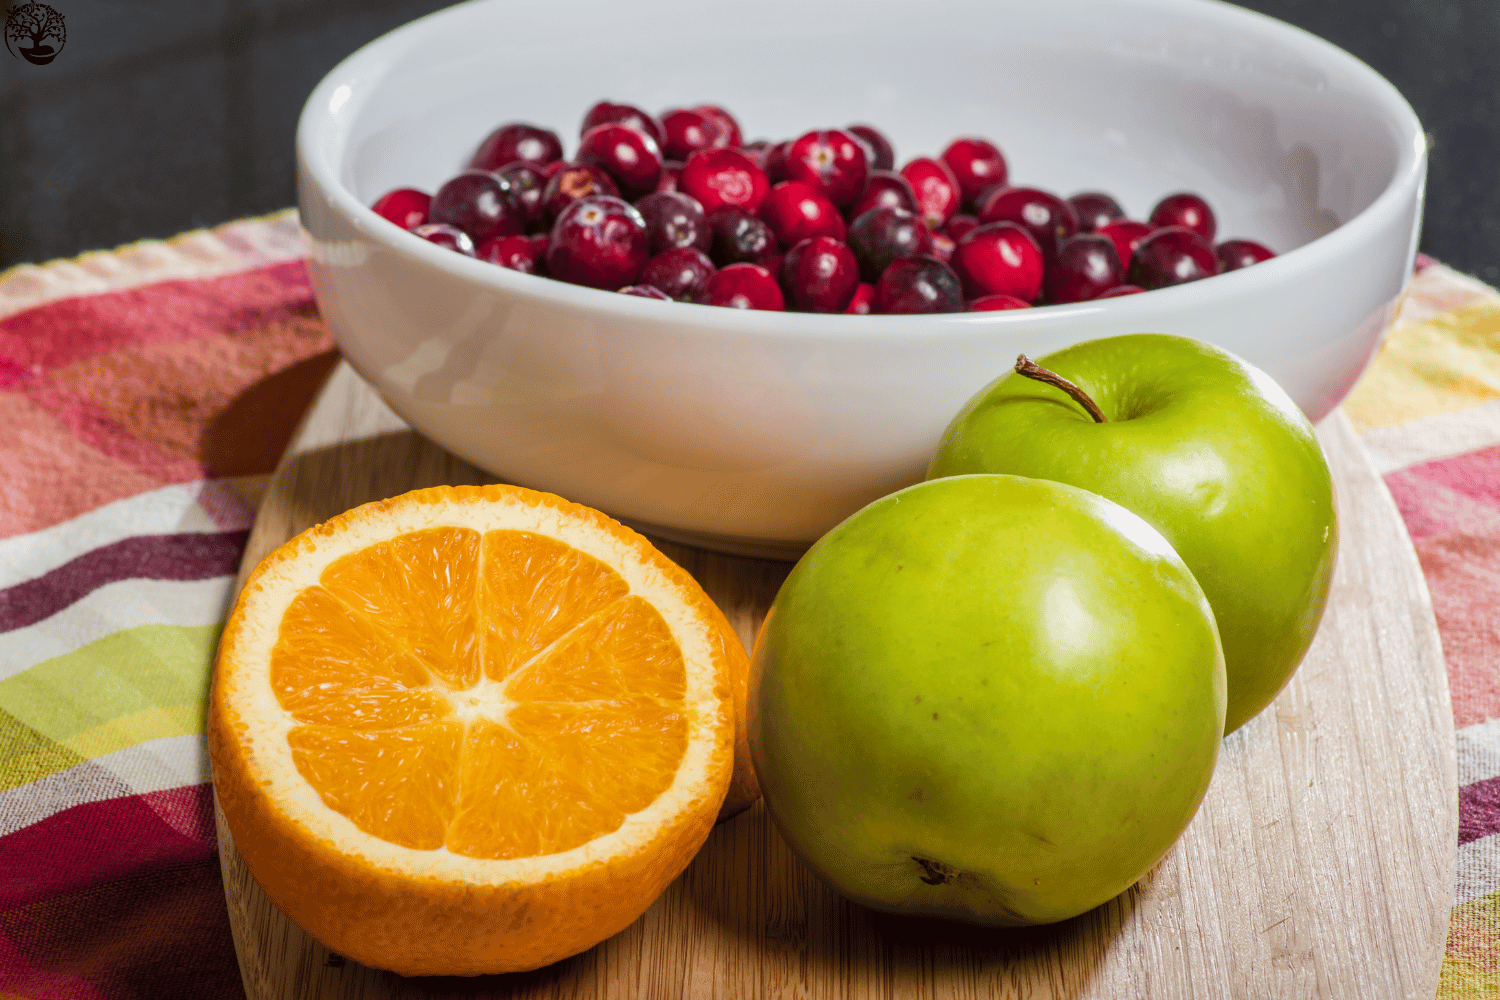 Cranberries, oranges, and apples on a colorful table cloth.